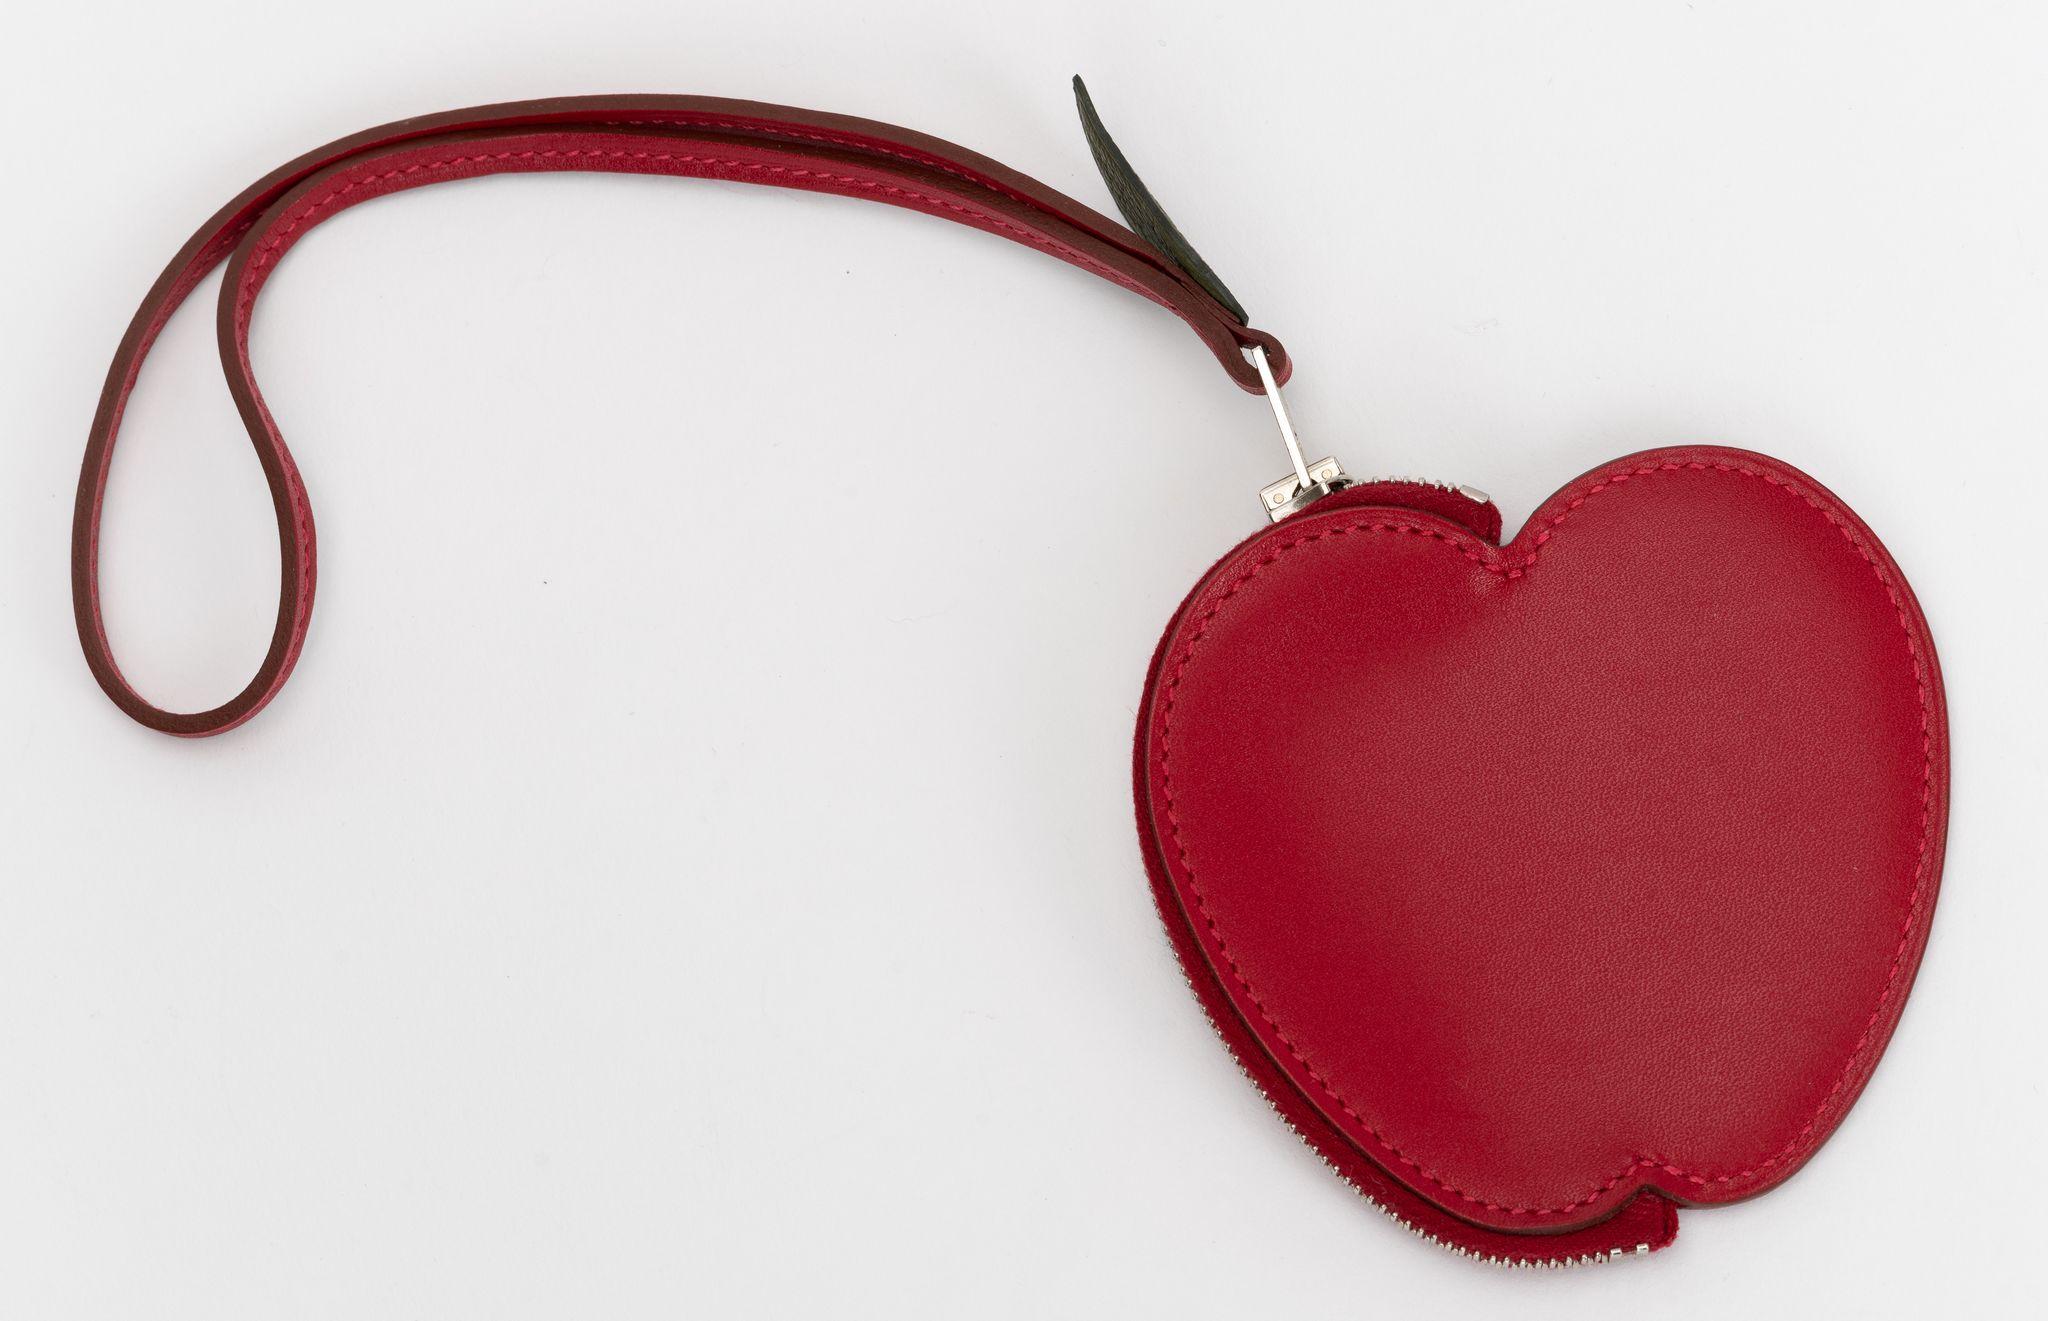 The Hermes Tadelakt Tutti Frutti Pomme Coin Purse Wristlet in Rouge Vif is a small bag charm also doubles as a wristlet coin purse. This apple shaped coin purse is is made from bright red calfskin, the zipper handle features a canopee green leaf